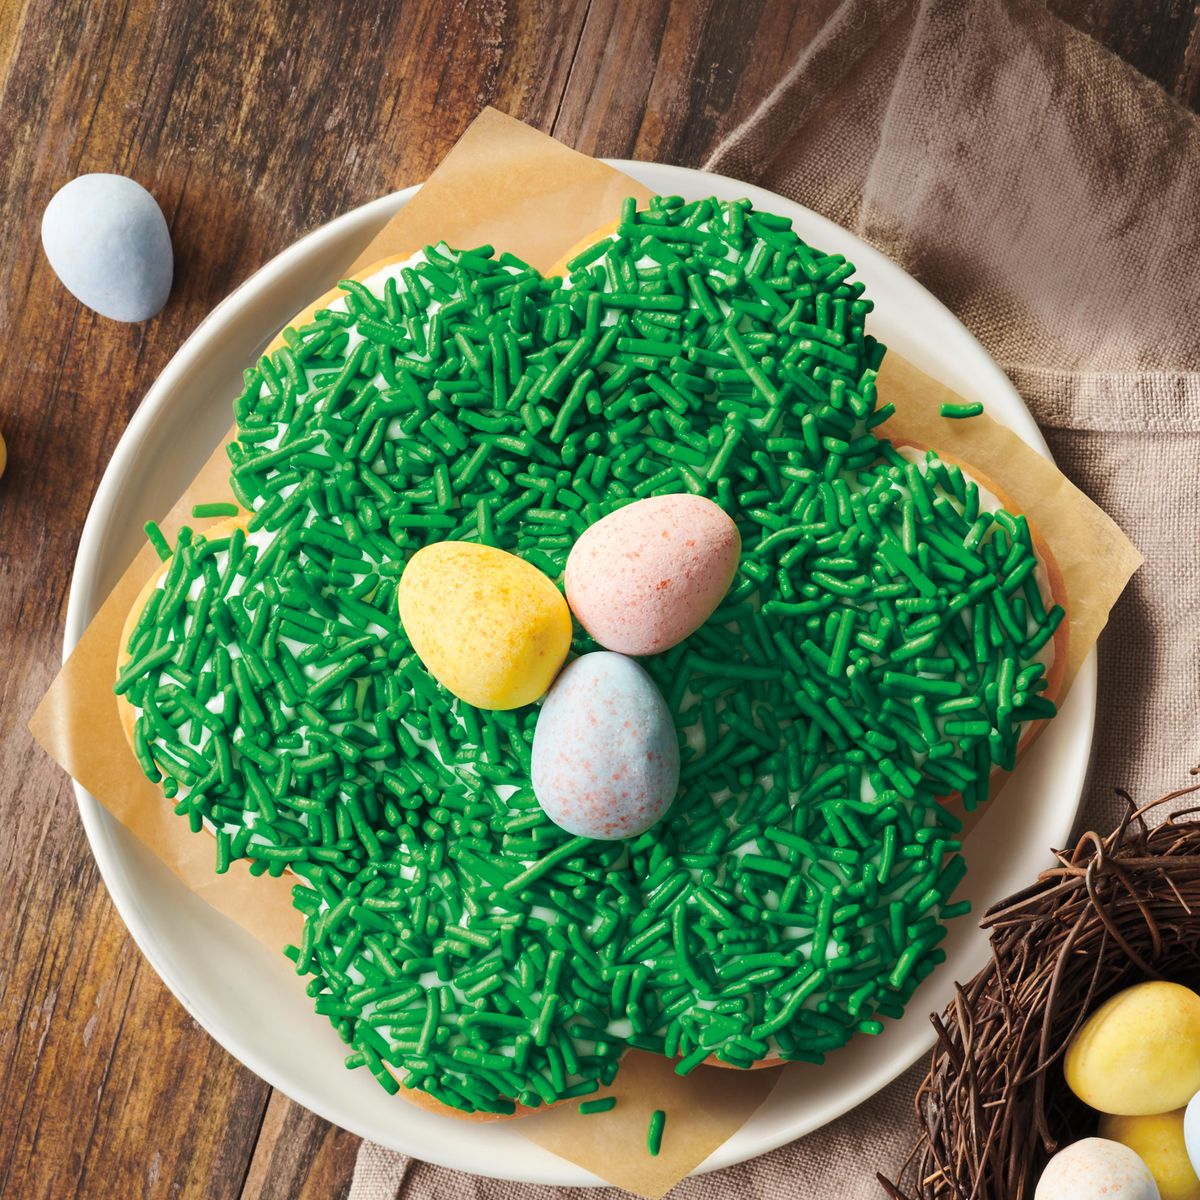 Tim Hortons Cafe and Bake Shop - Spring has sprung, and it's looking pretty  sweet. Flower Donuts and Easter Egg Donuts have officially arrived  @timhortonsus Get 'em before they're gone! #spring #donuts